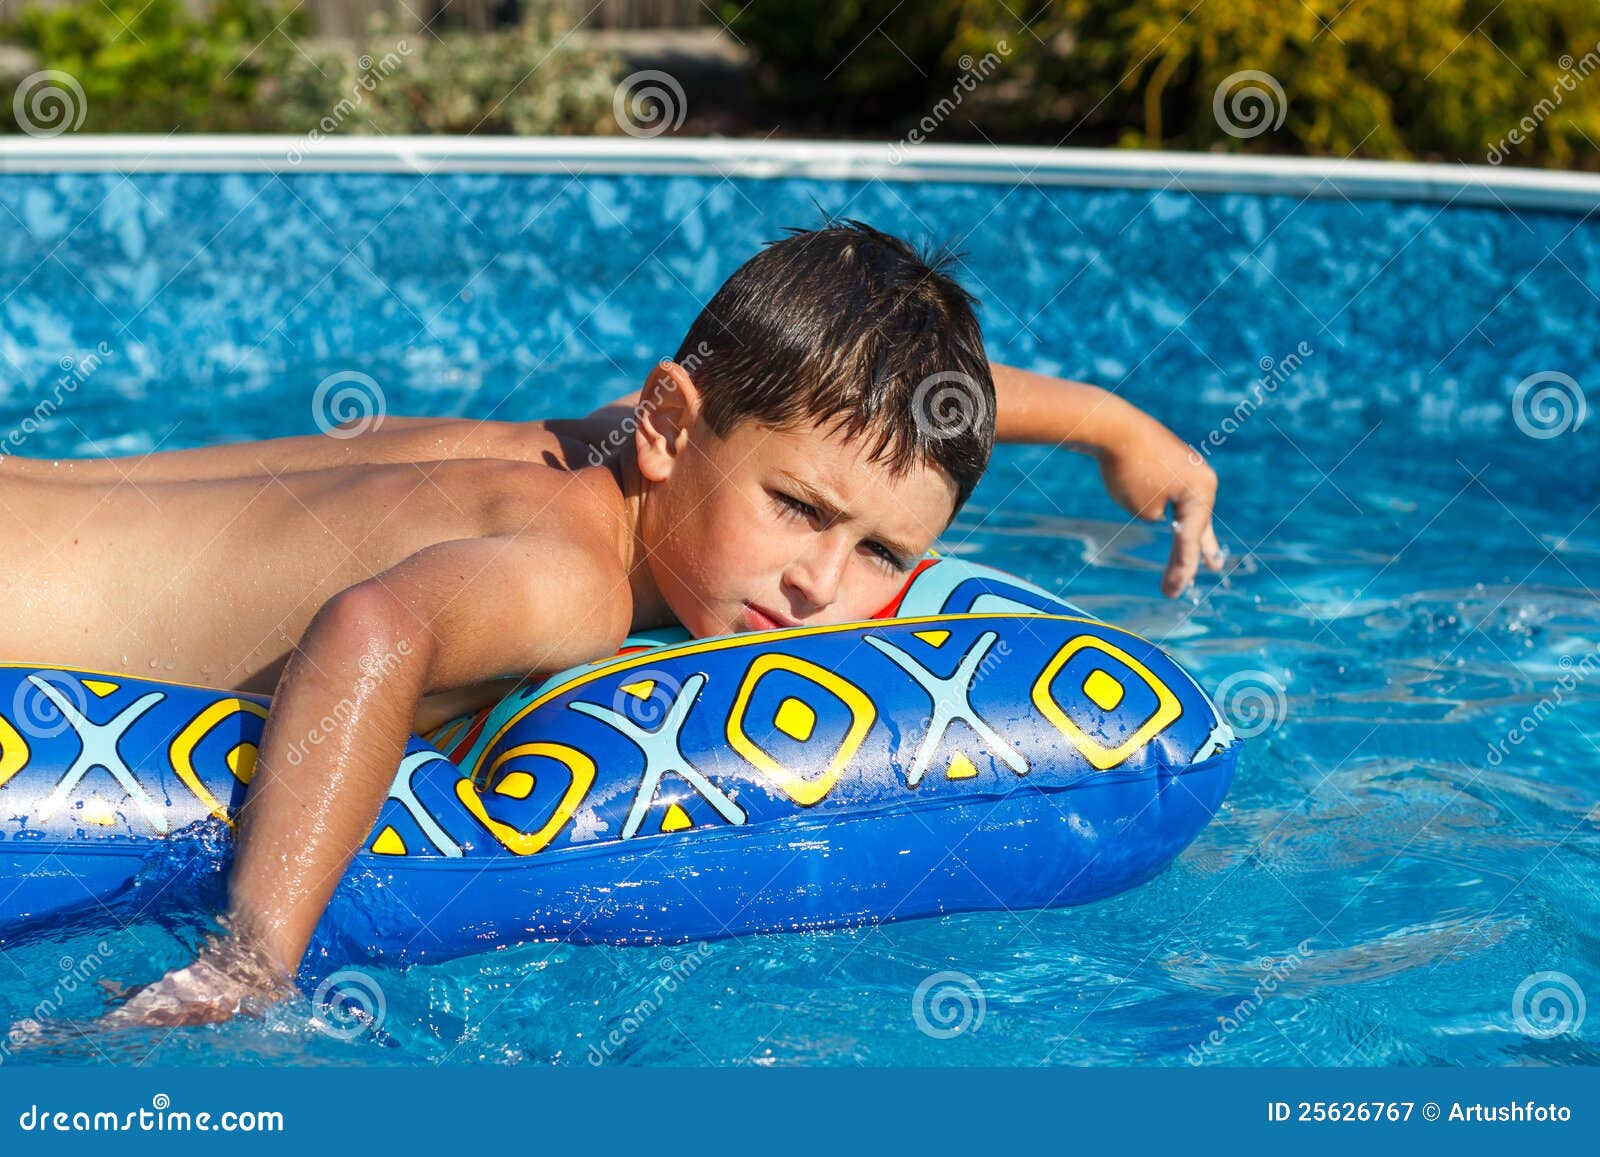 Boy In Swimming Pool Stock Image Image Of Recreation